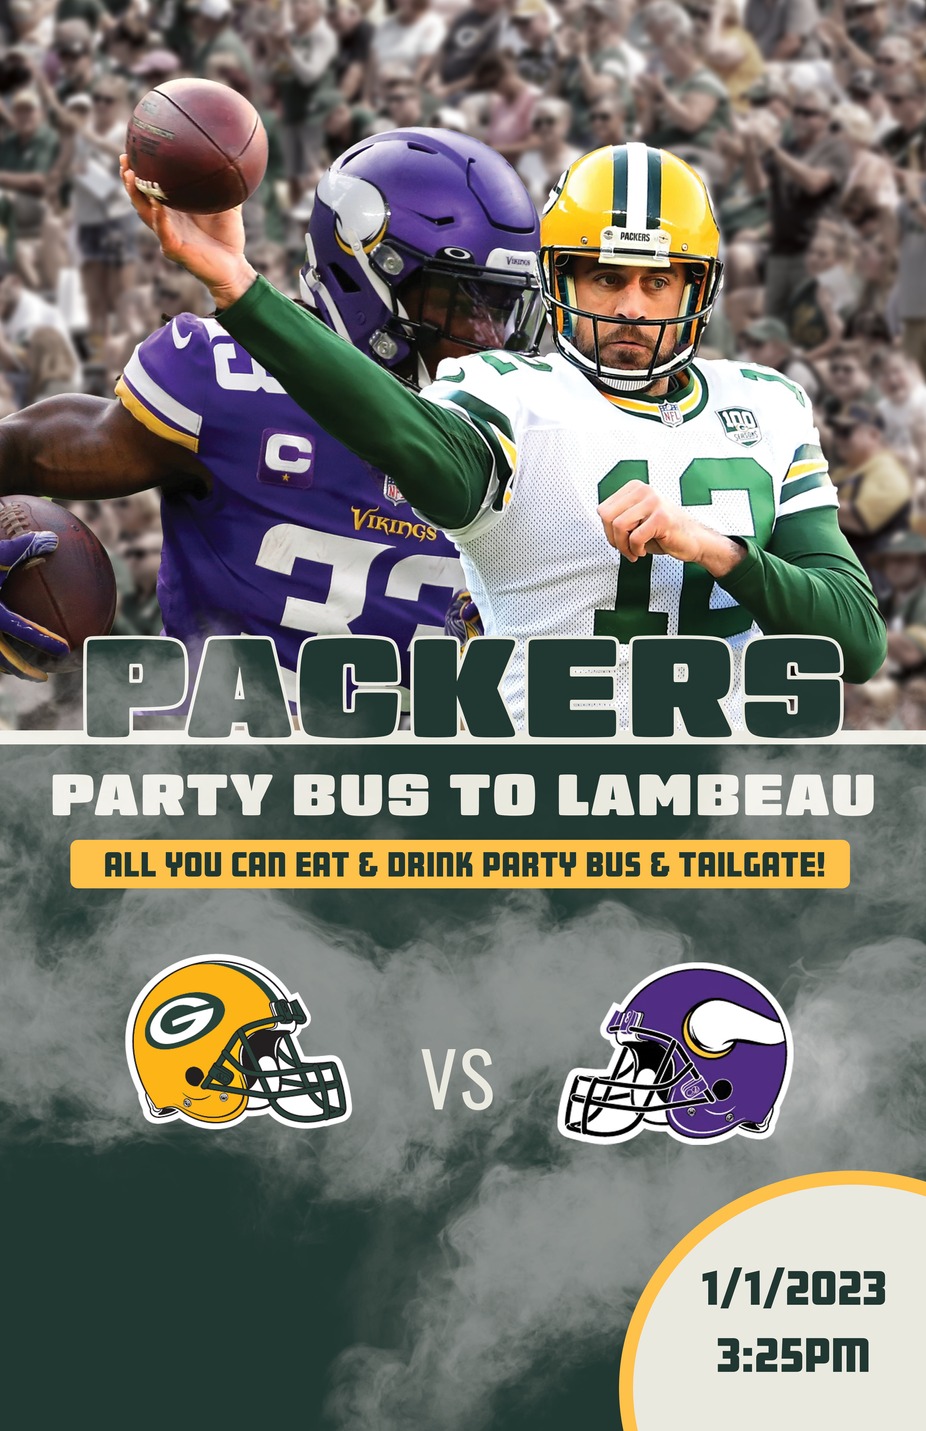 Packers Vs. Vikings Party Bus to Lambeau event photo